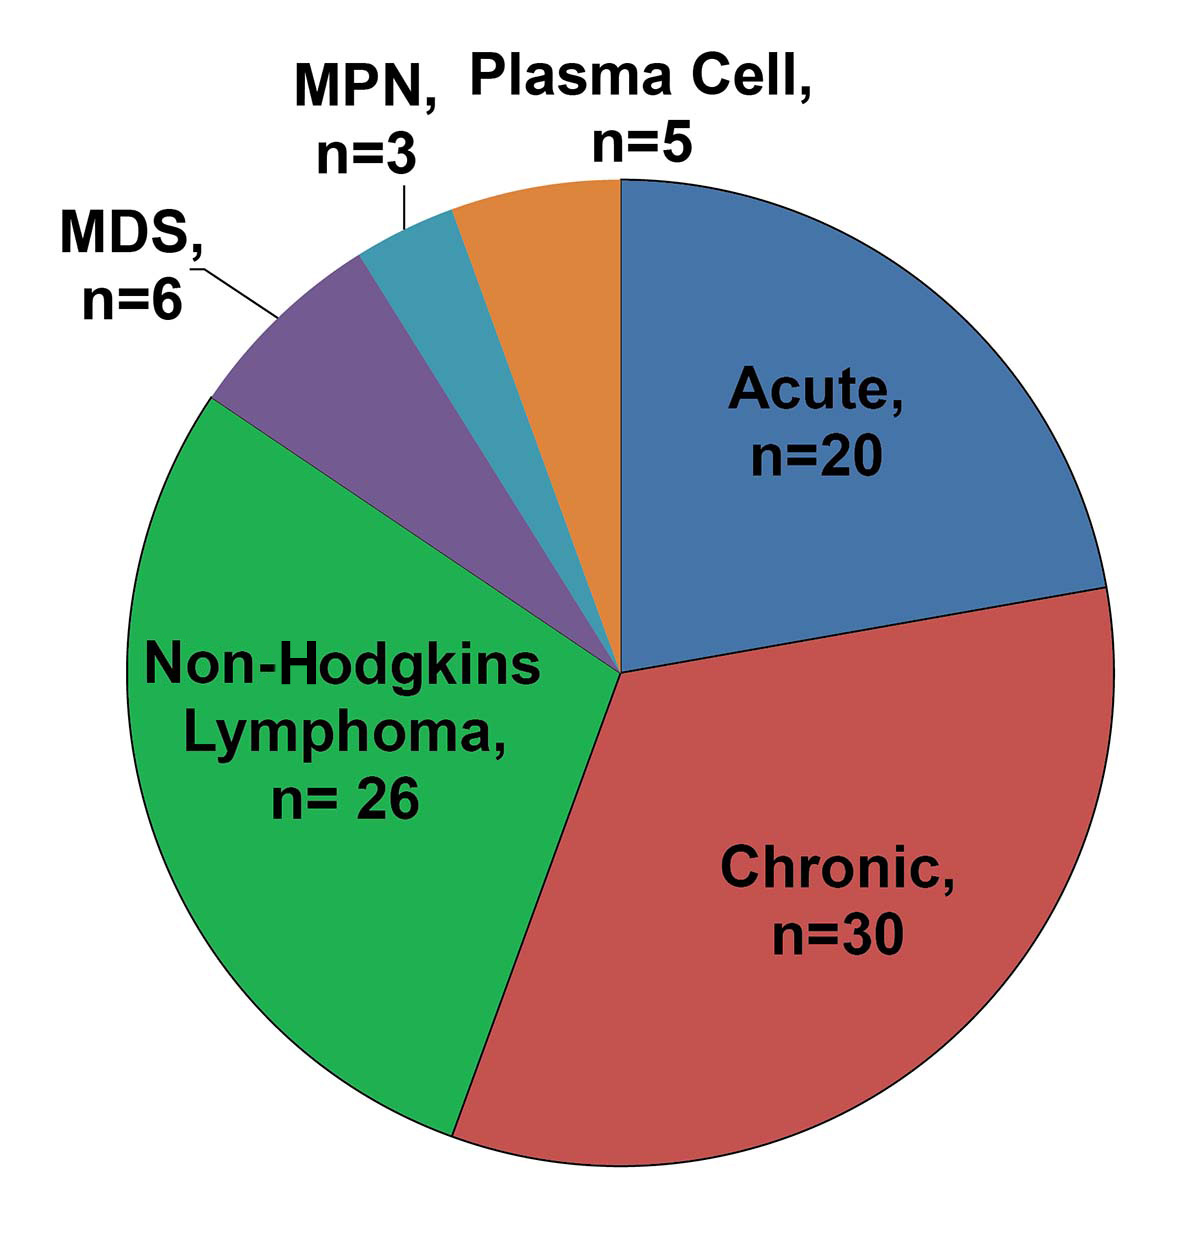 Breakdown of the 90 malignant samples according to the number of acute, chronic, non-Hodgkin’s lymphoma, myelodysplastic syndromes (MDS), myeloproliferative neoplasms (MPN), and plasma cell neoplasms included in this study.